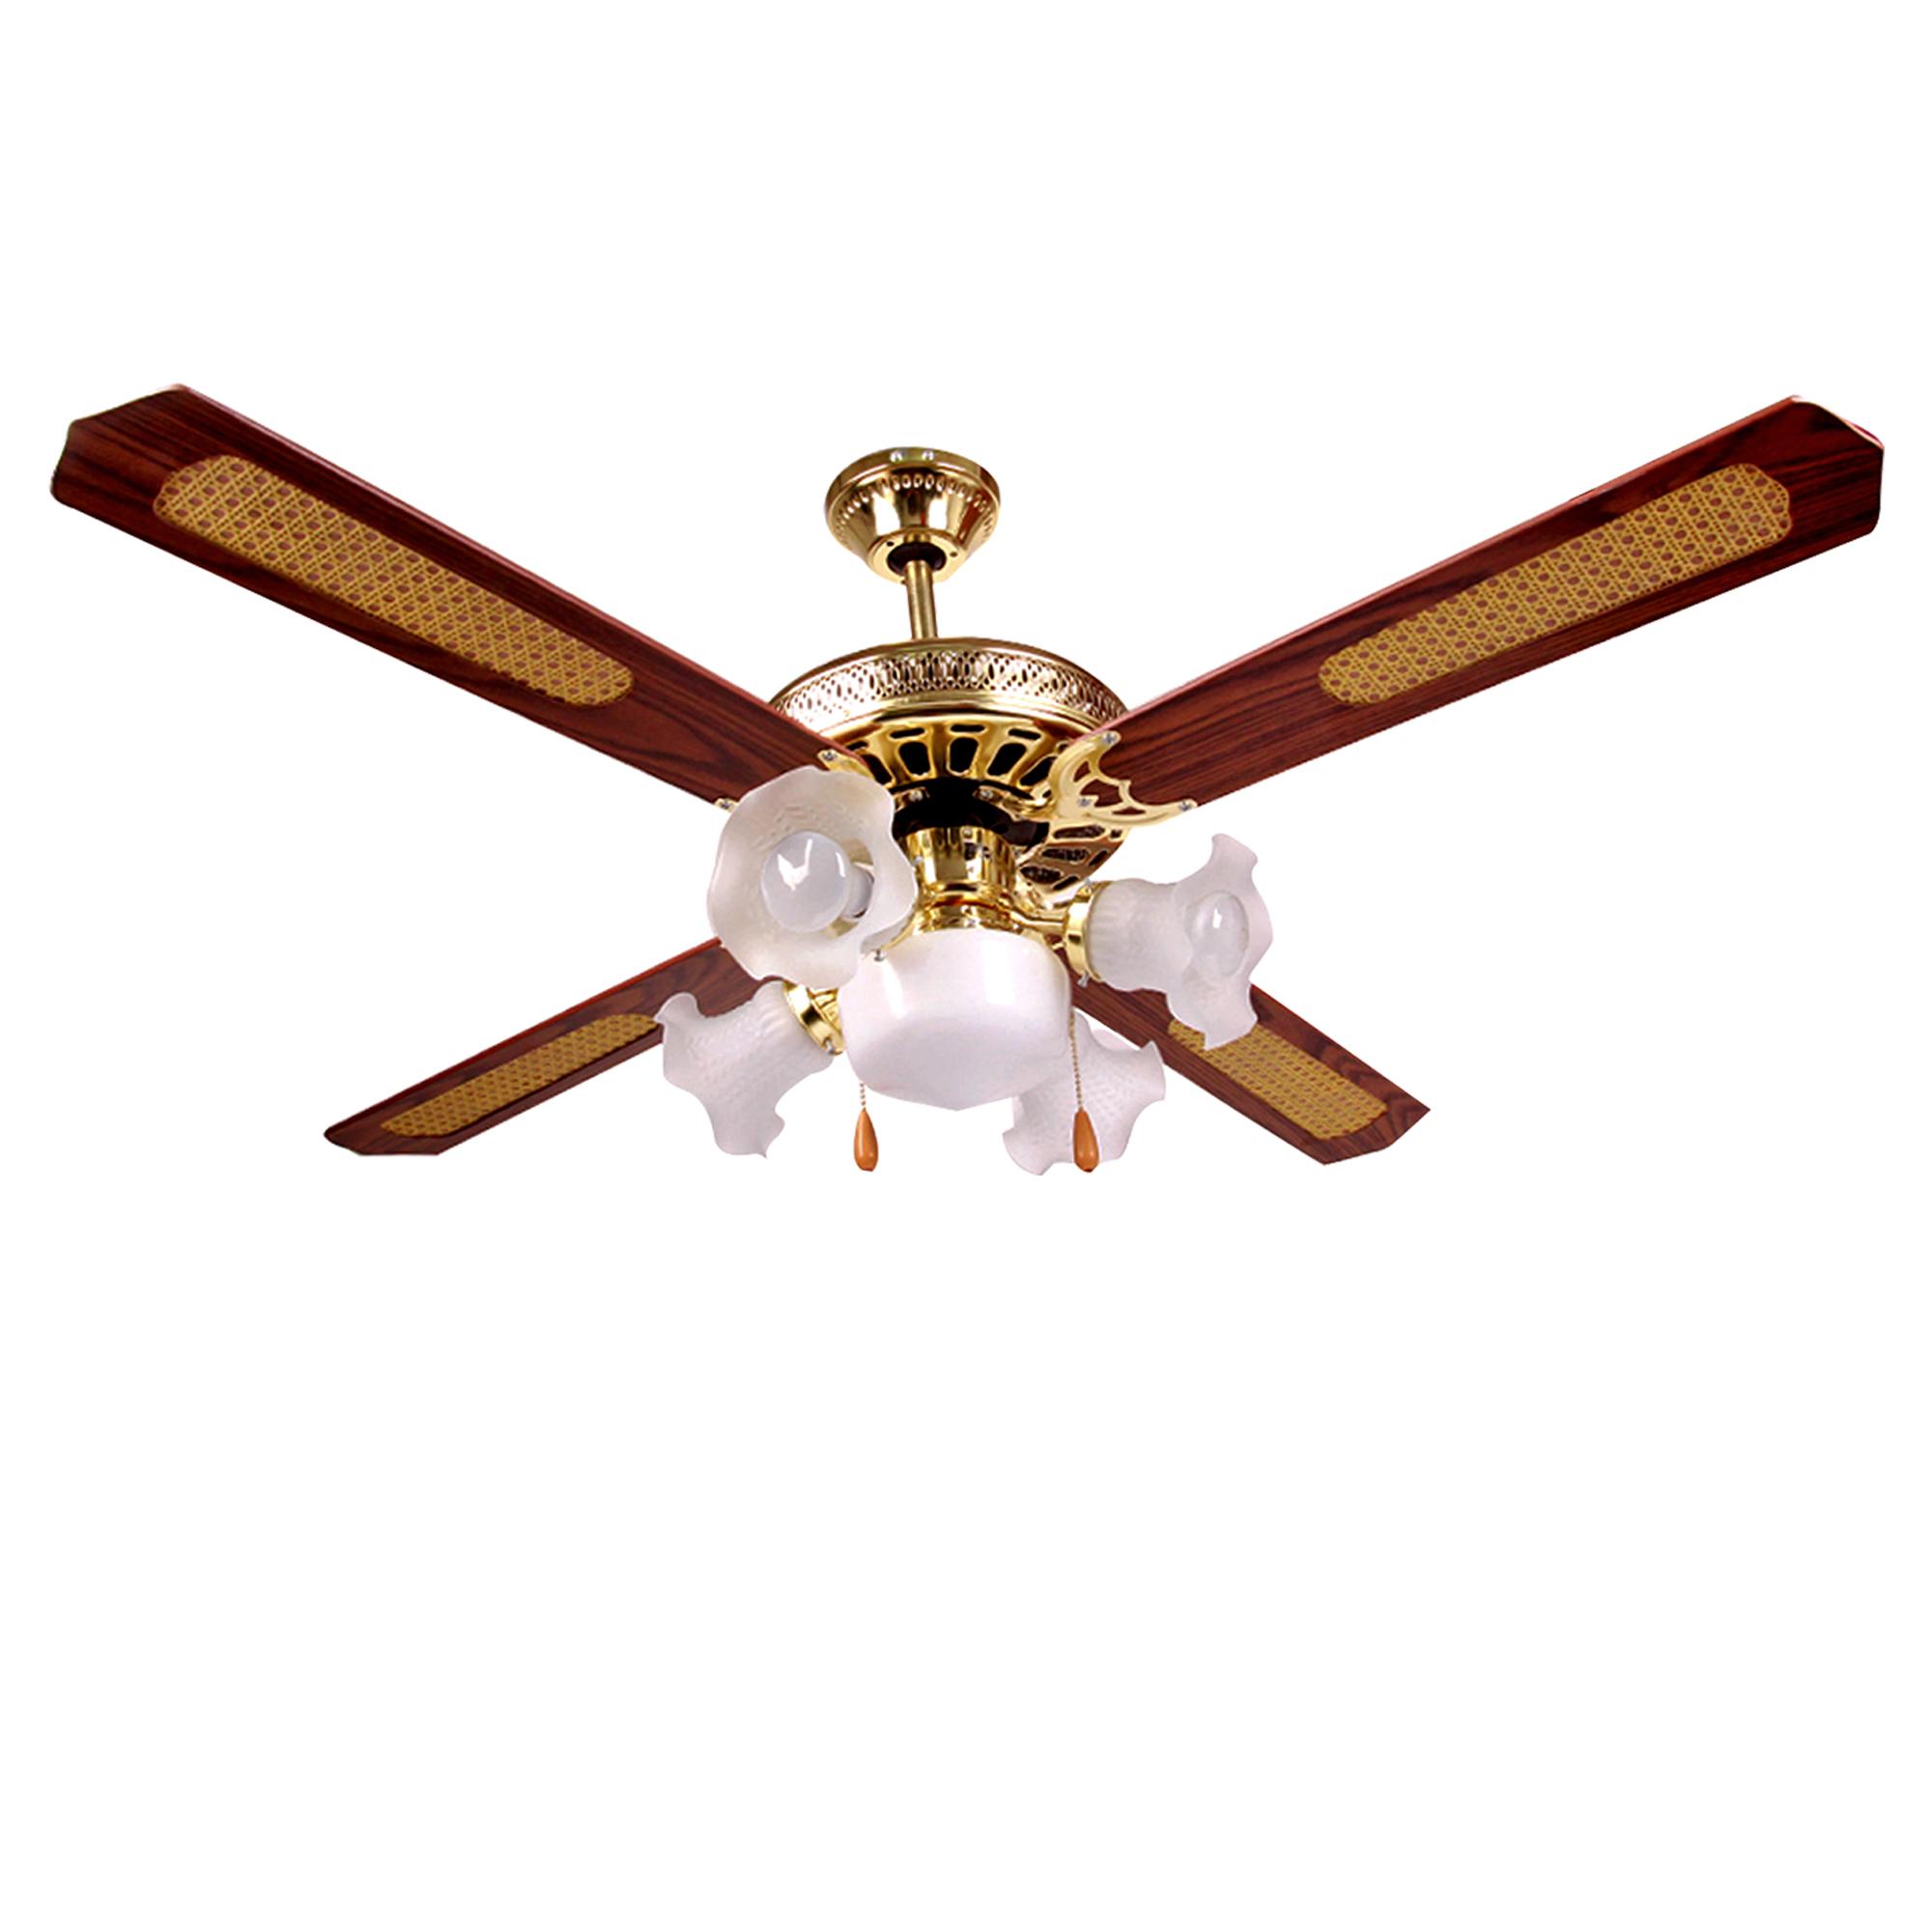 American Star Decorative Ceiling Fan 52 With 5 Lights 4 Blades